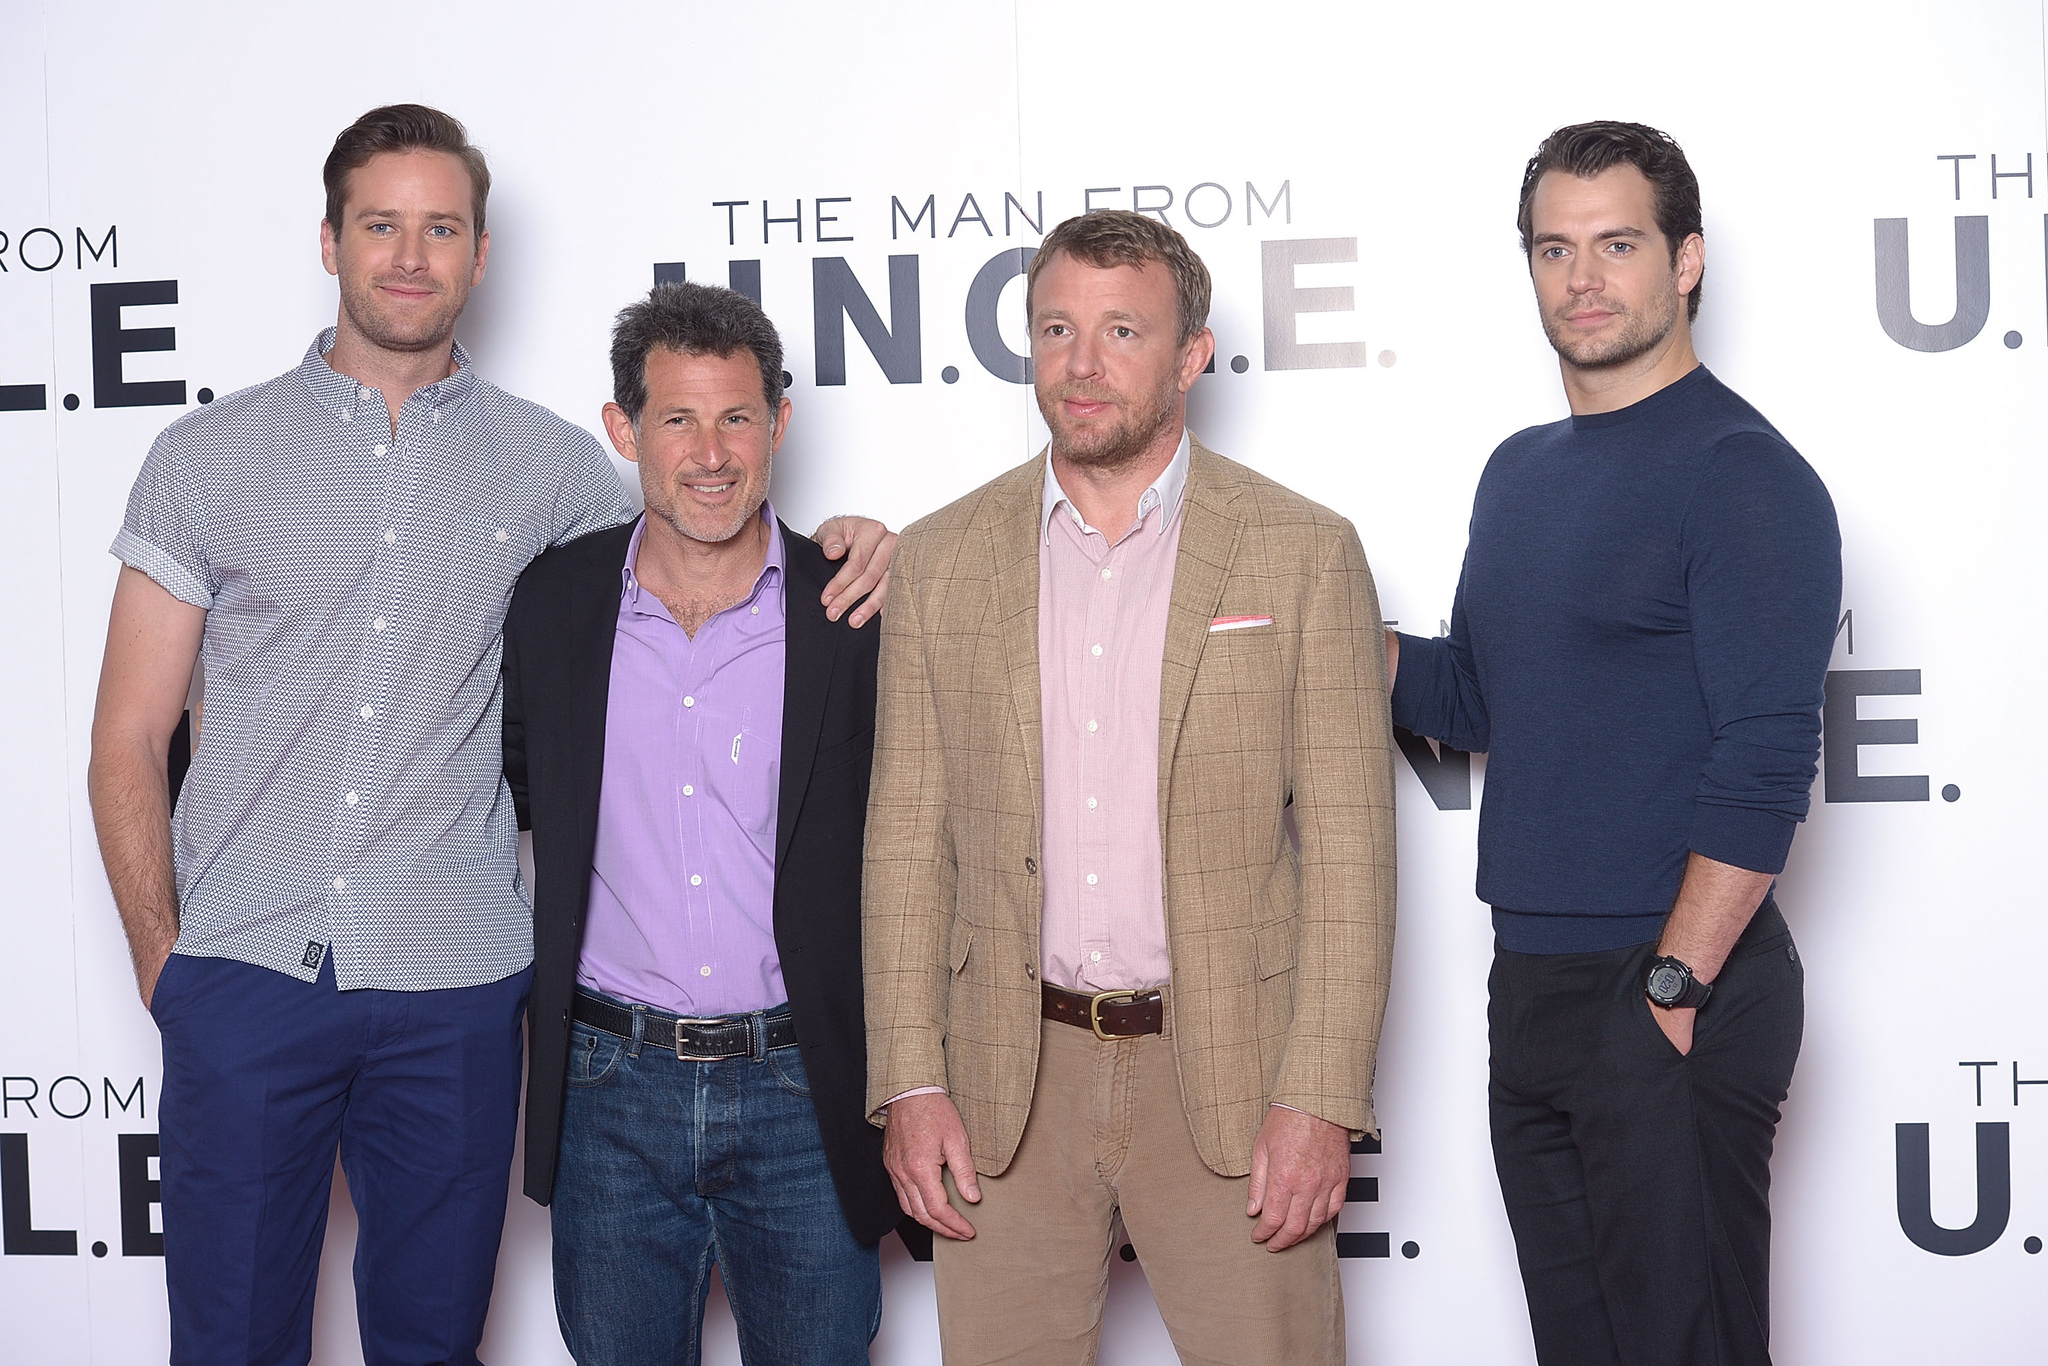 Guy Ritchie, Henry Cavill, Lionel Wigram and Armie Hammer at event of Snipas is U.N.C.L.E. (2015)